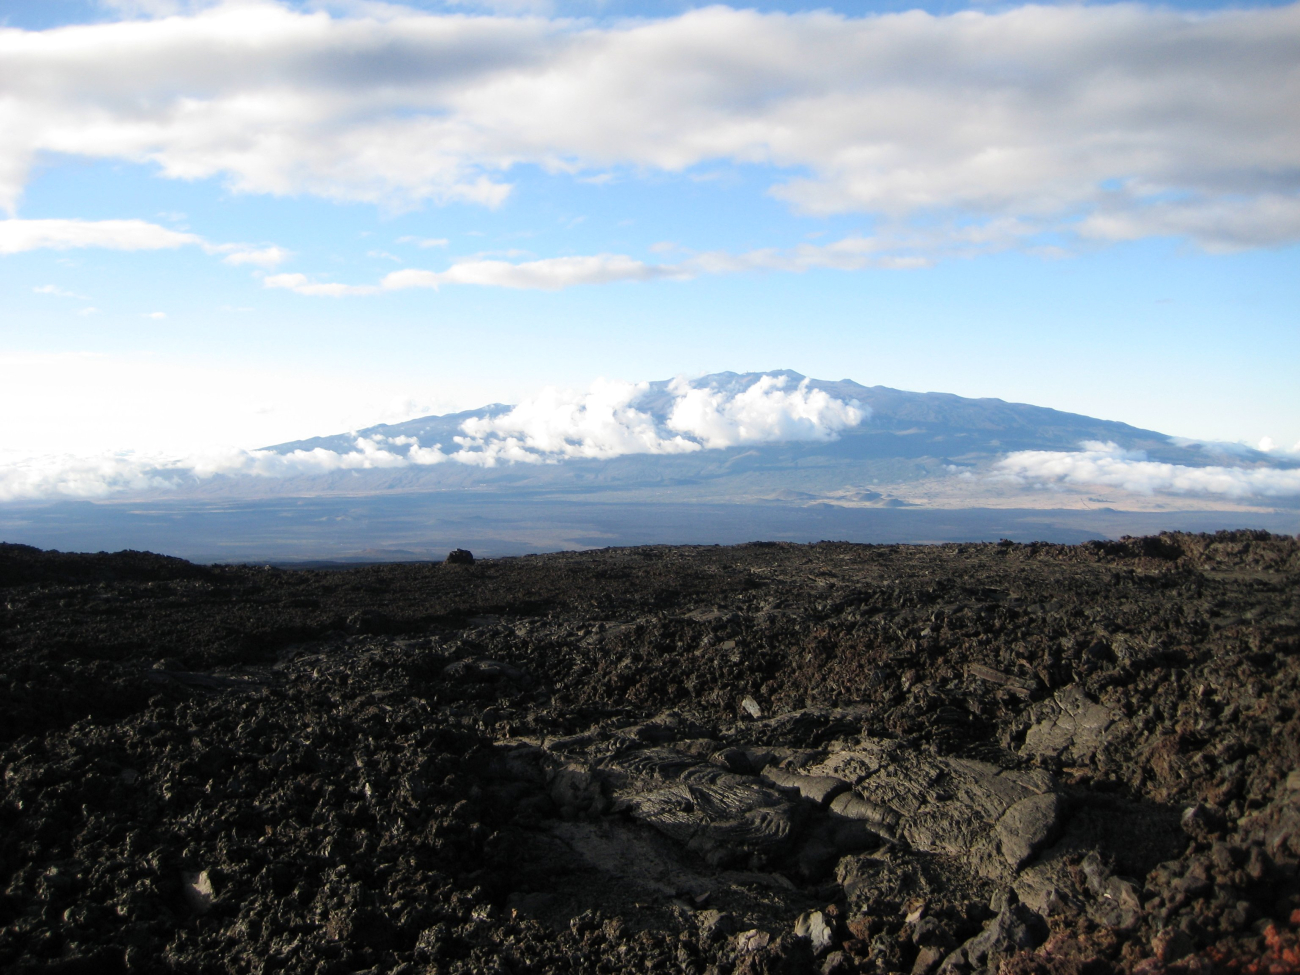 Looking across lava fields to Mauna Loa, the tallest mountain on earth from base to peak